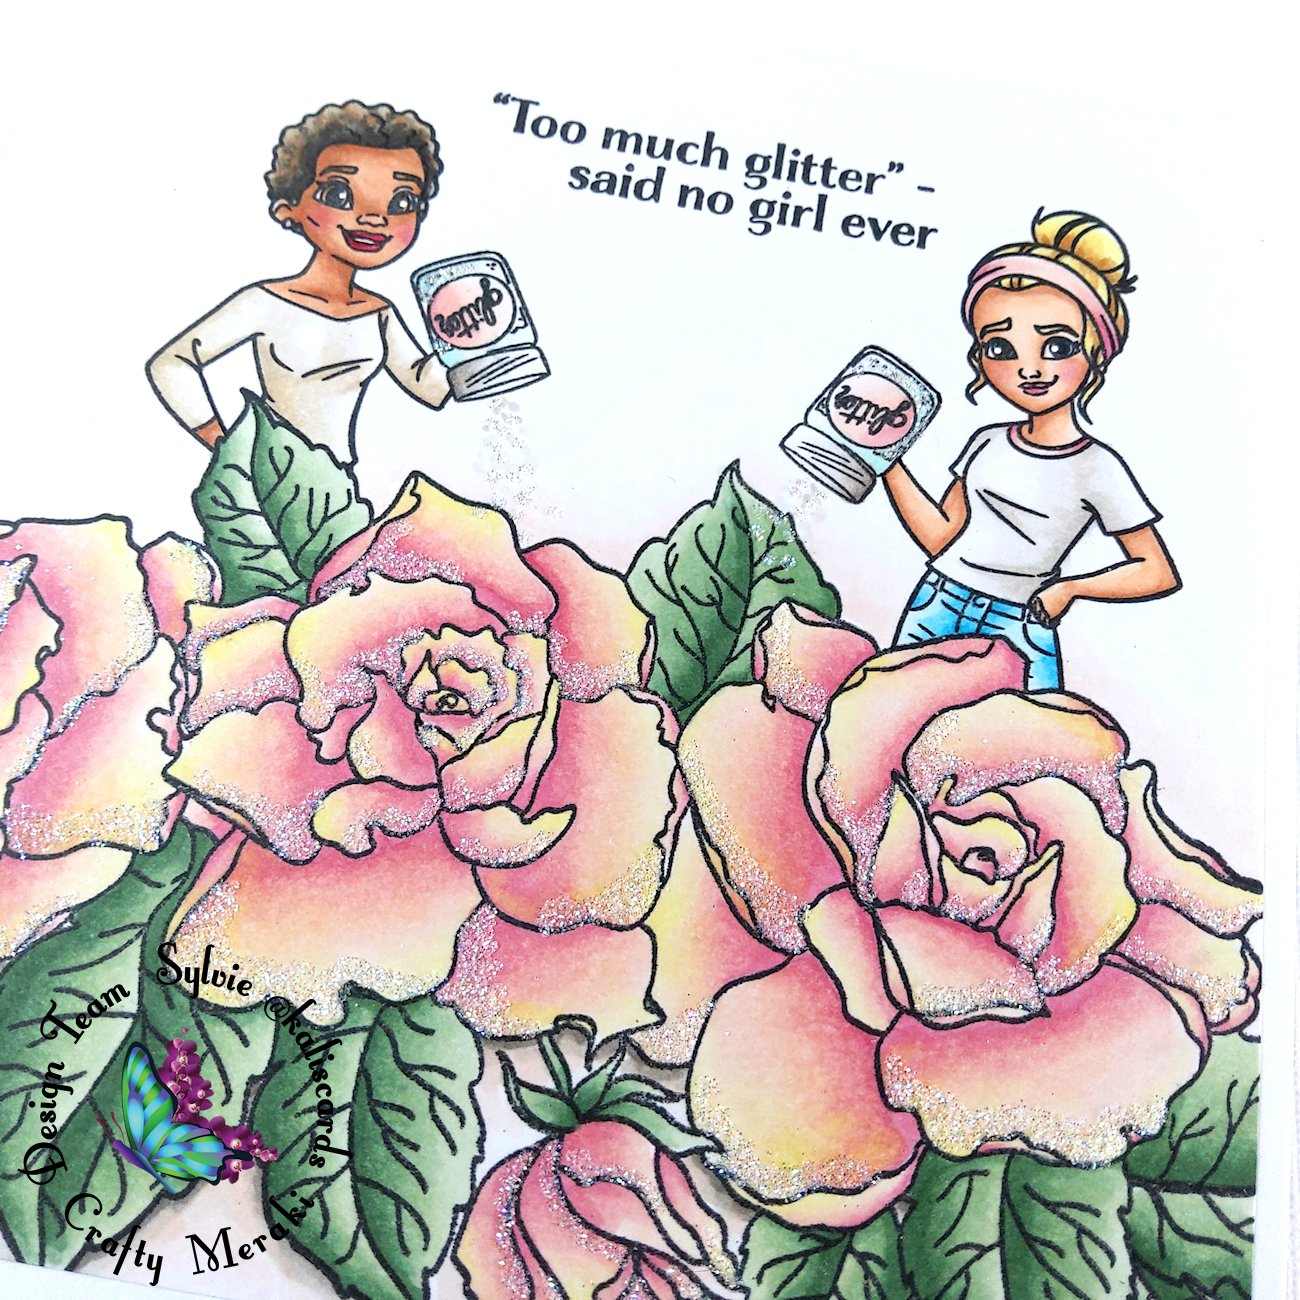 Too much glitter -said no girl ever by Sylvie @Kaliscards